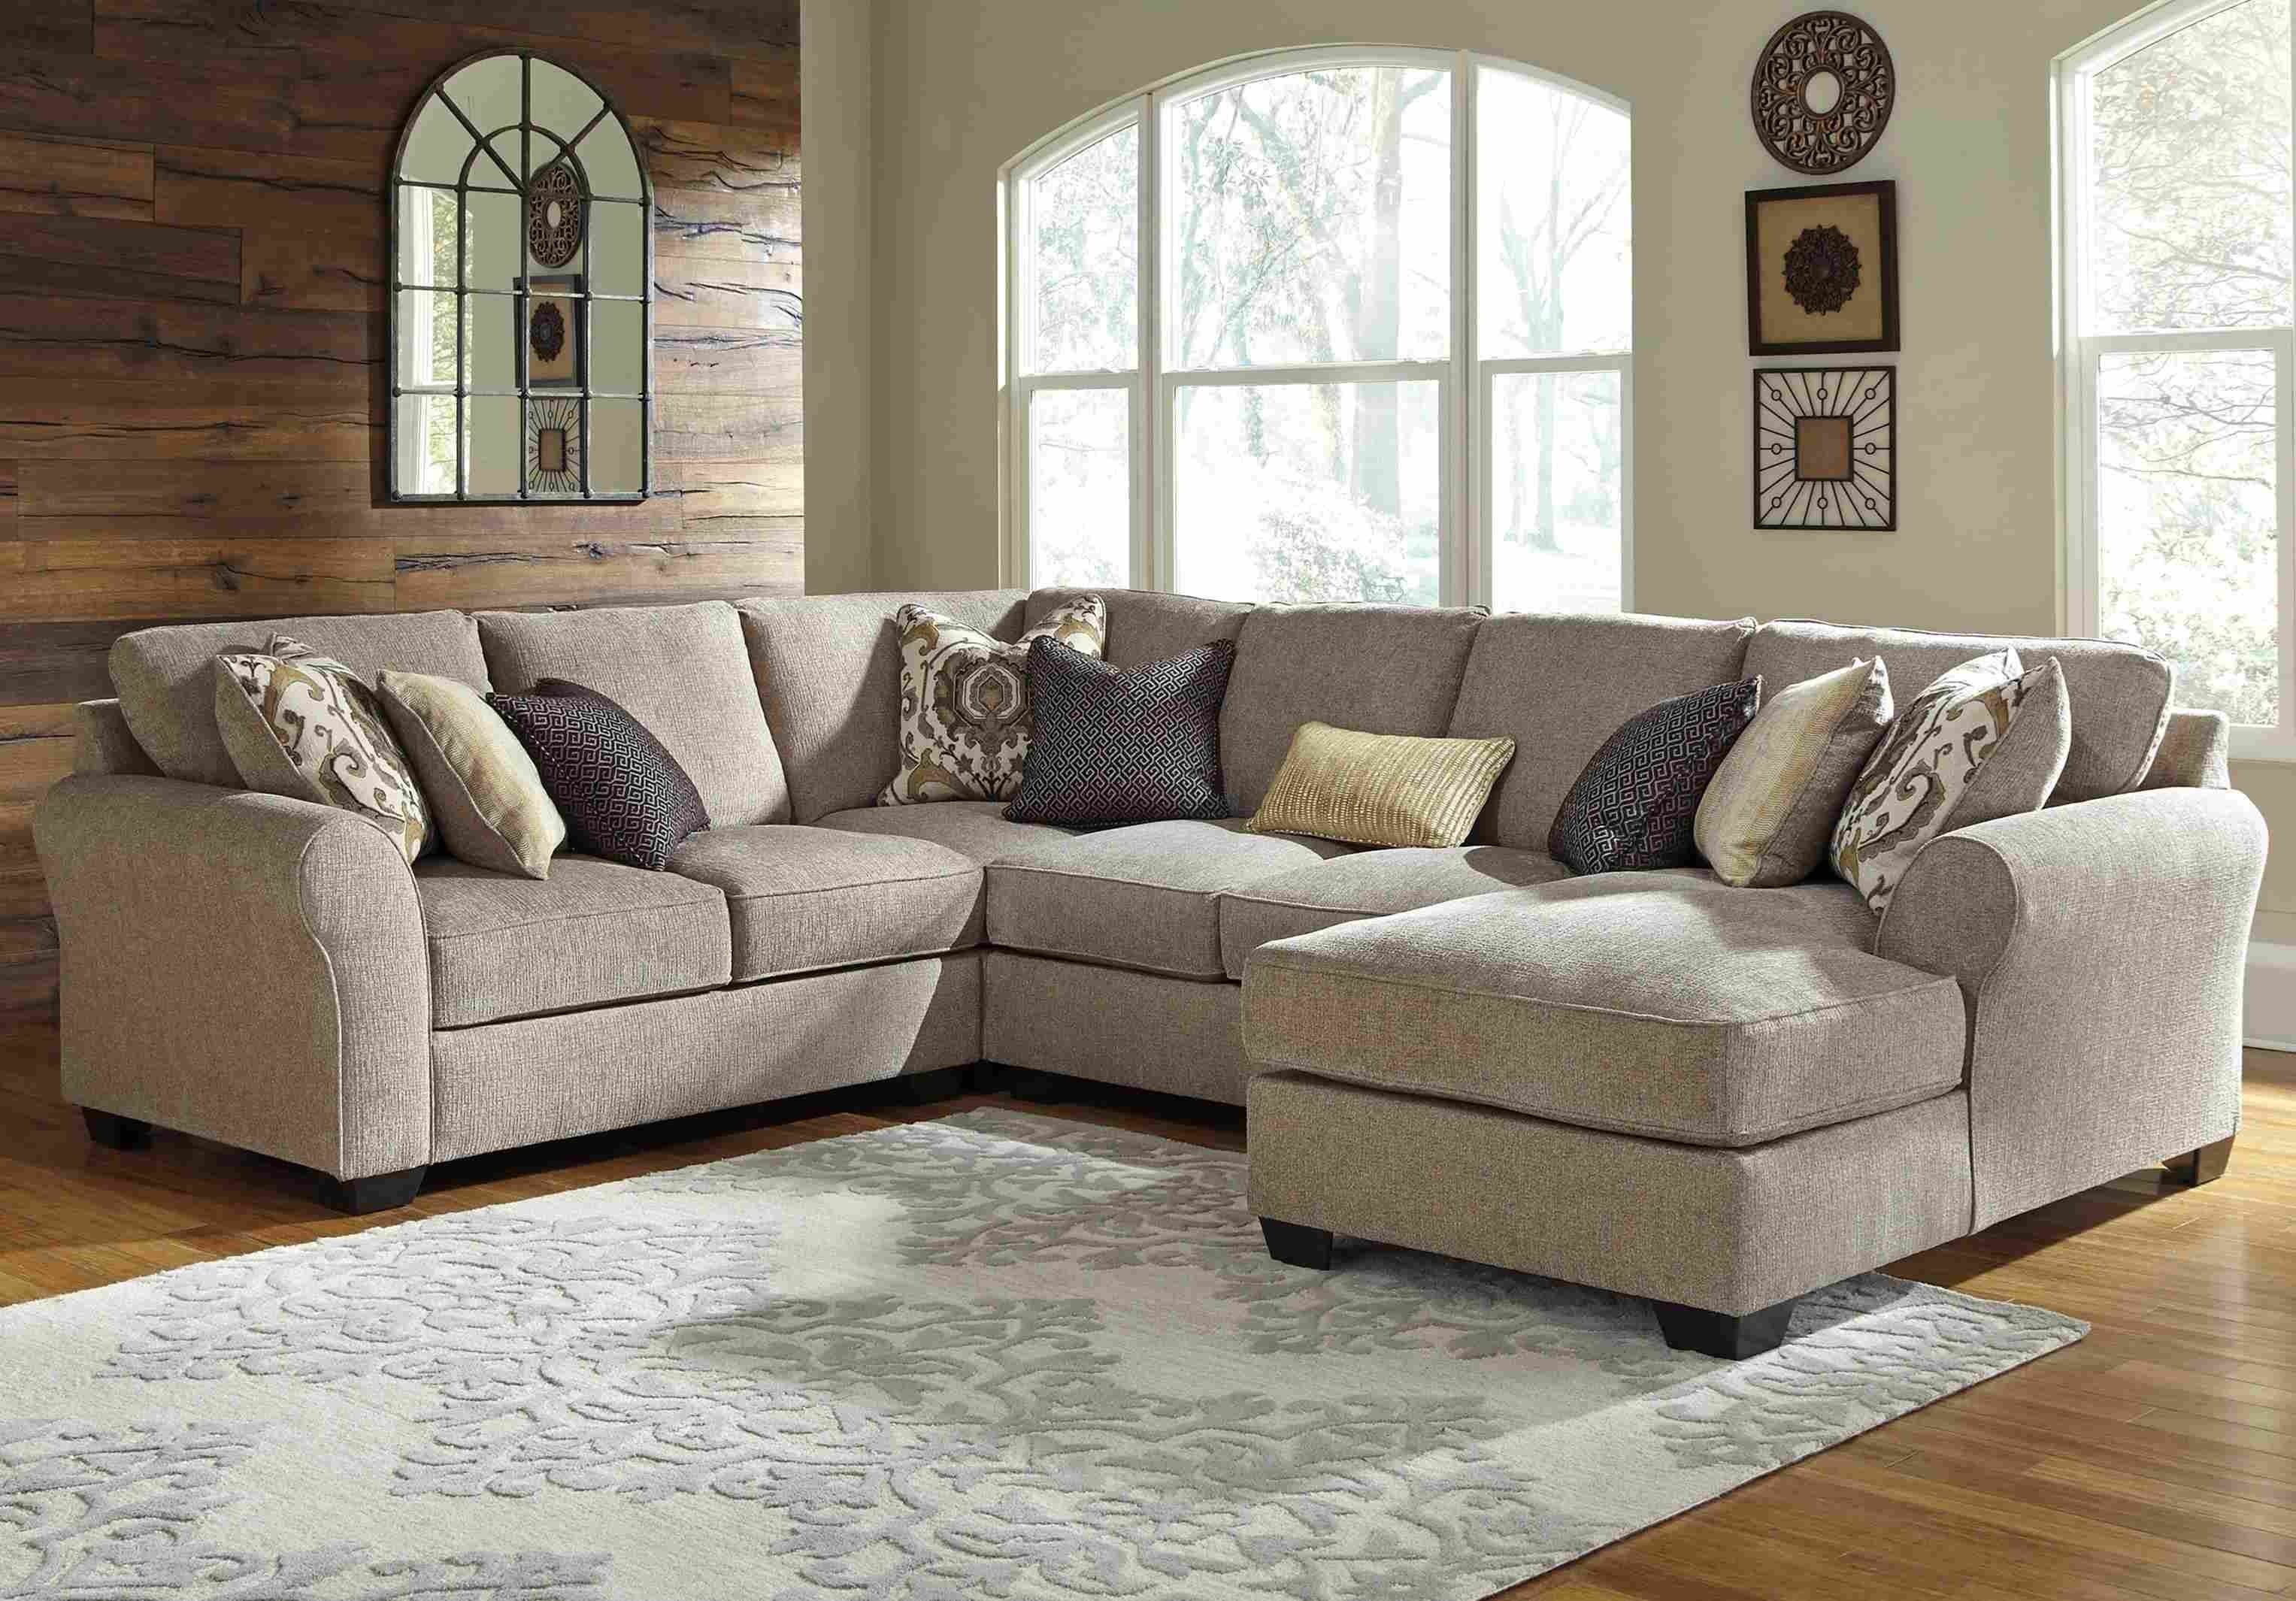 Sofas : Big Sectional Couch Blue Sectional Large Sectional Sectional Regarding Delano 2 Piece Sectionals With Laf Oversized Chaise (View 17 of 25)